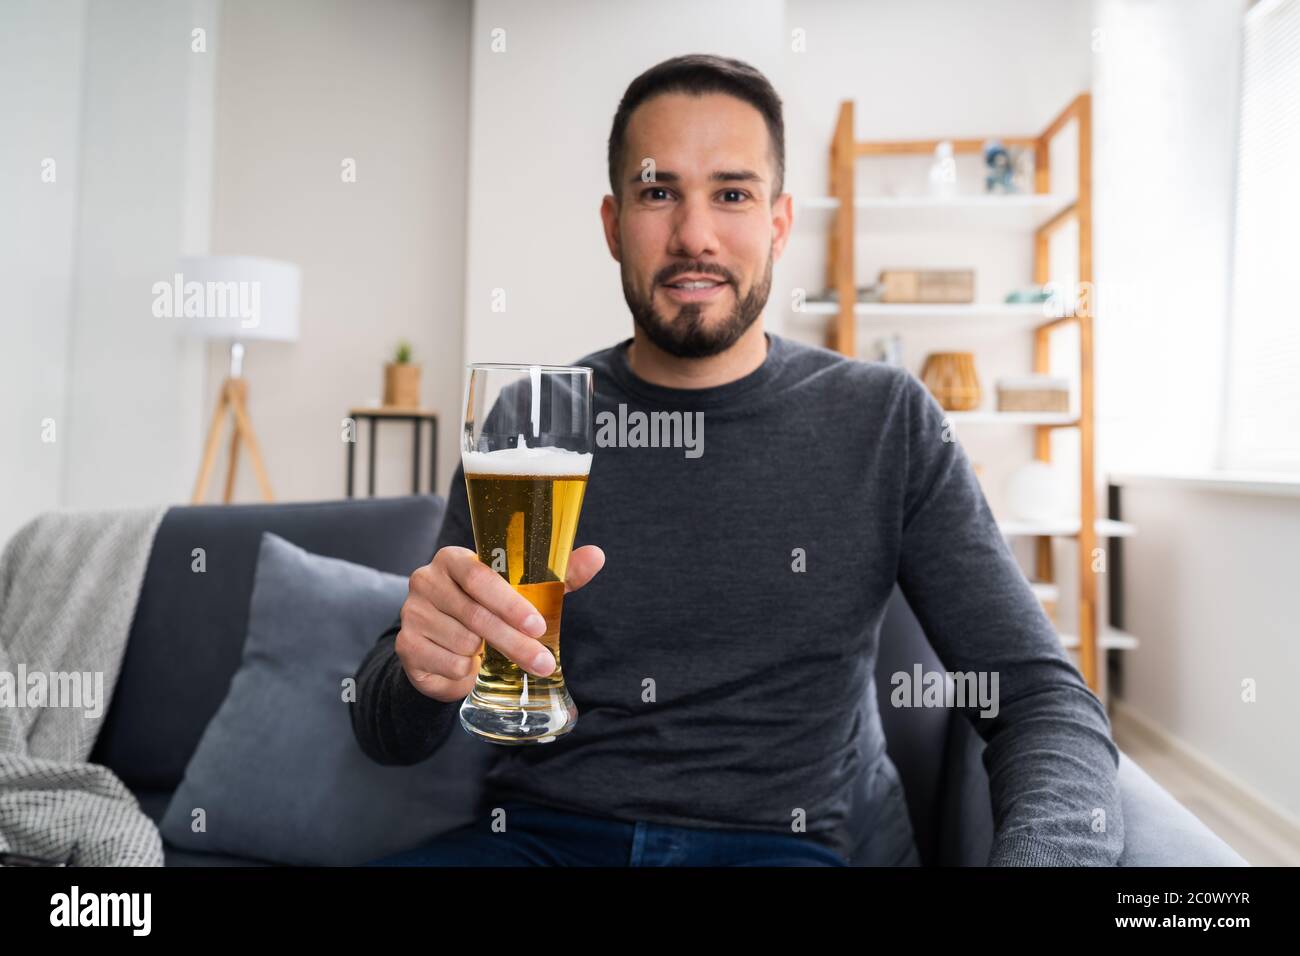 Man Drinking Beverage Beer Alone At Home Stock Photo